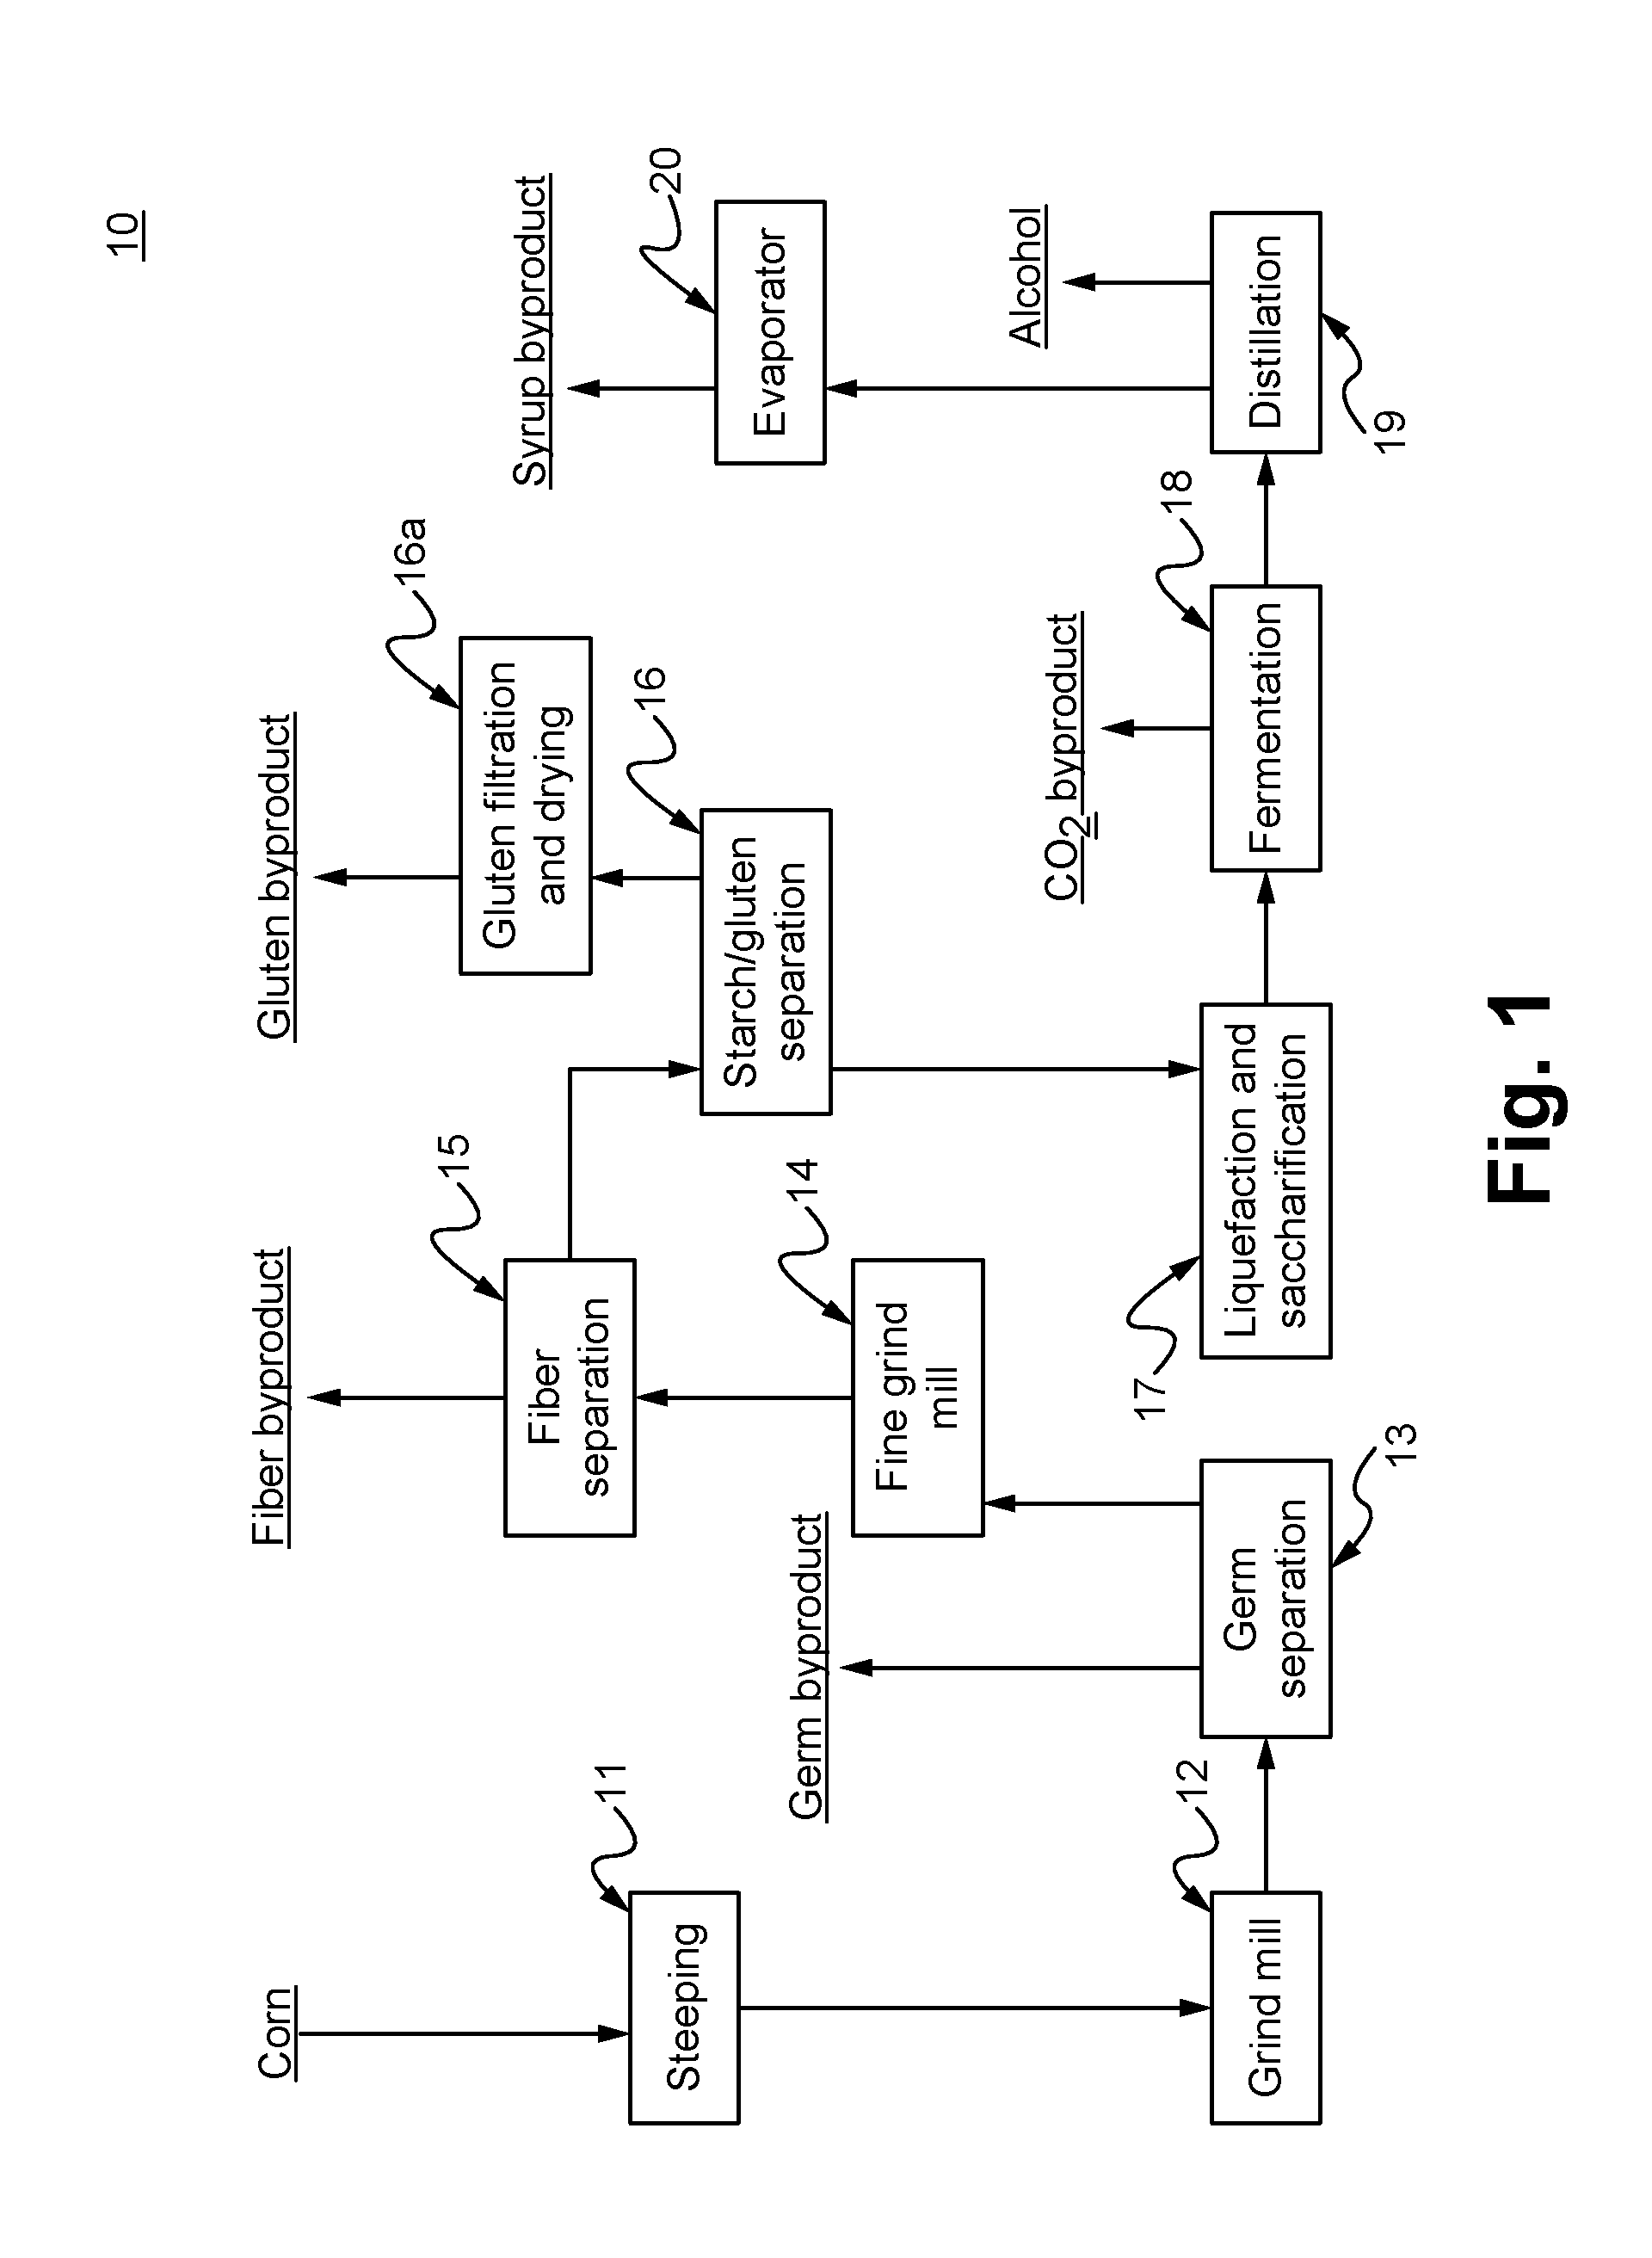 Method of and system for producing a high value animal feed additive from a stillage in an alcohol production process